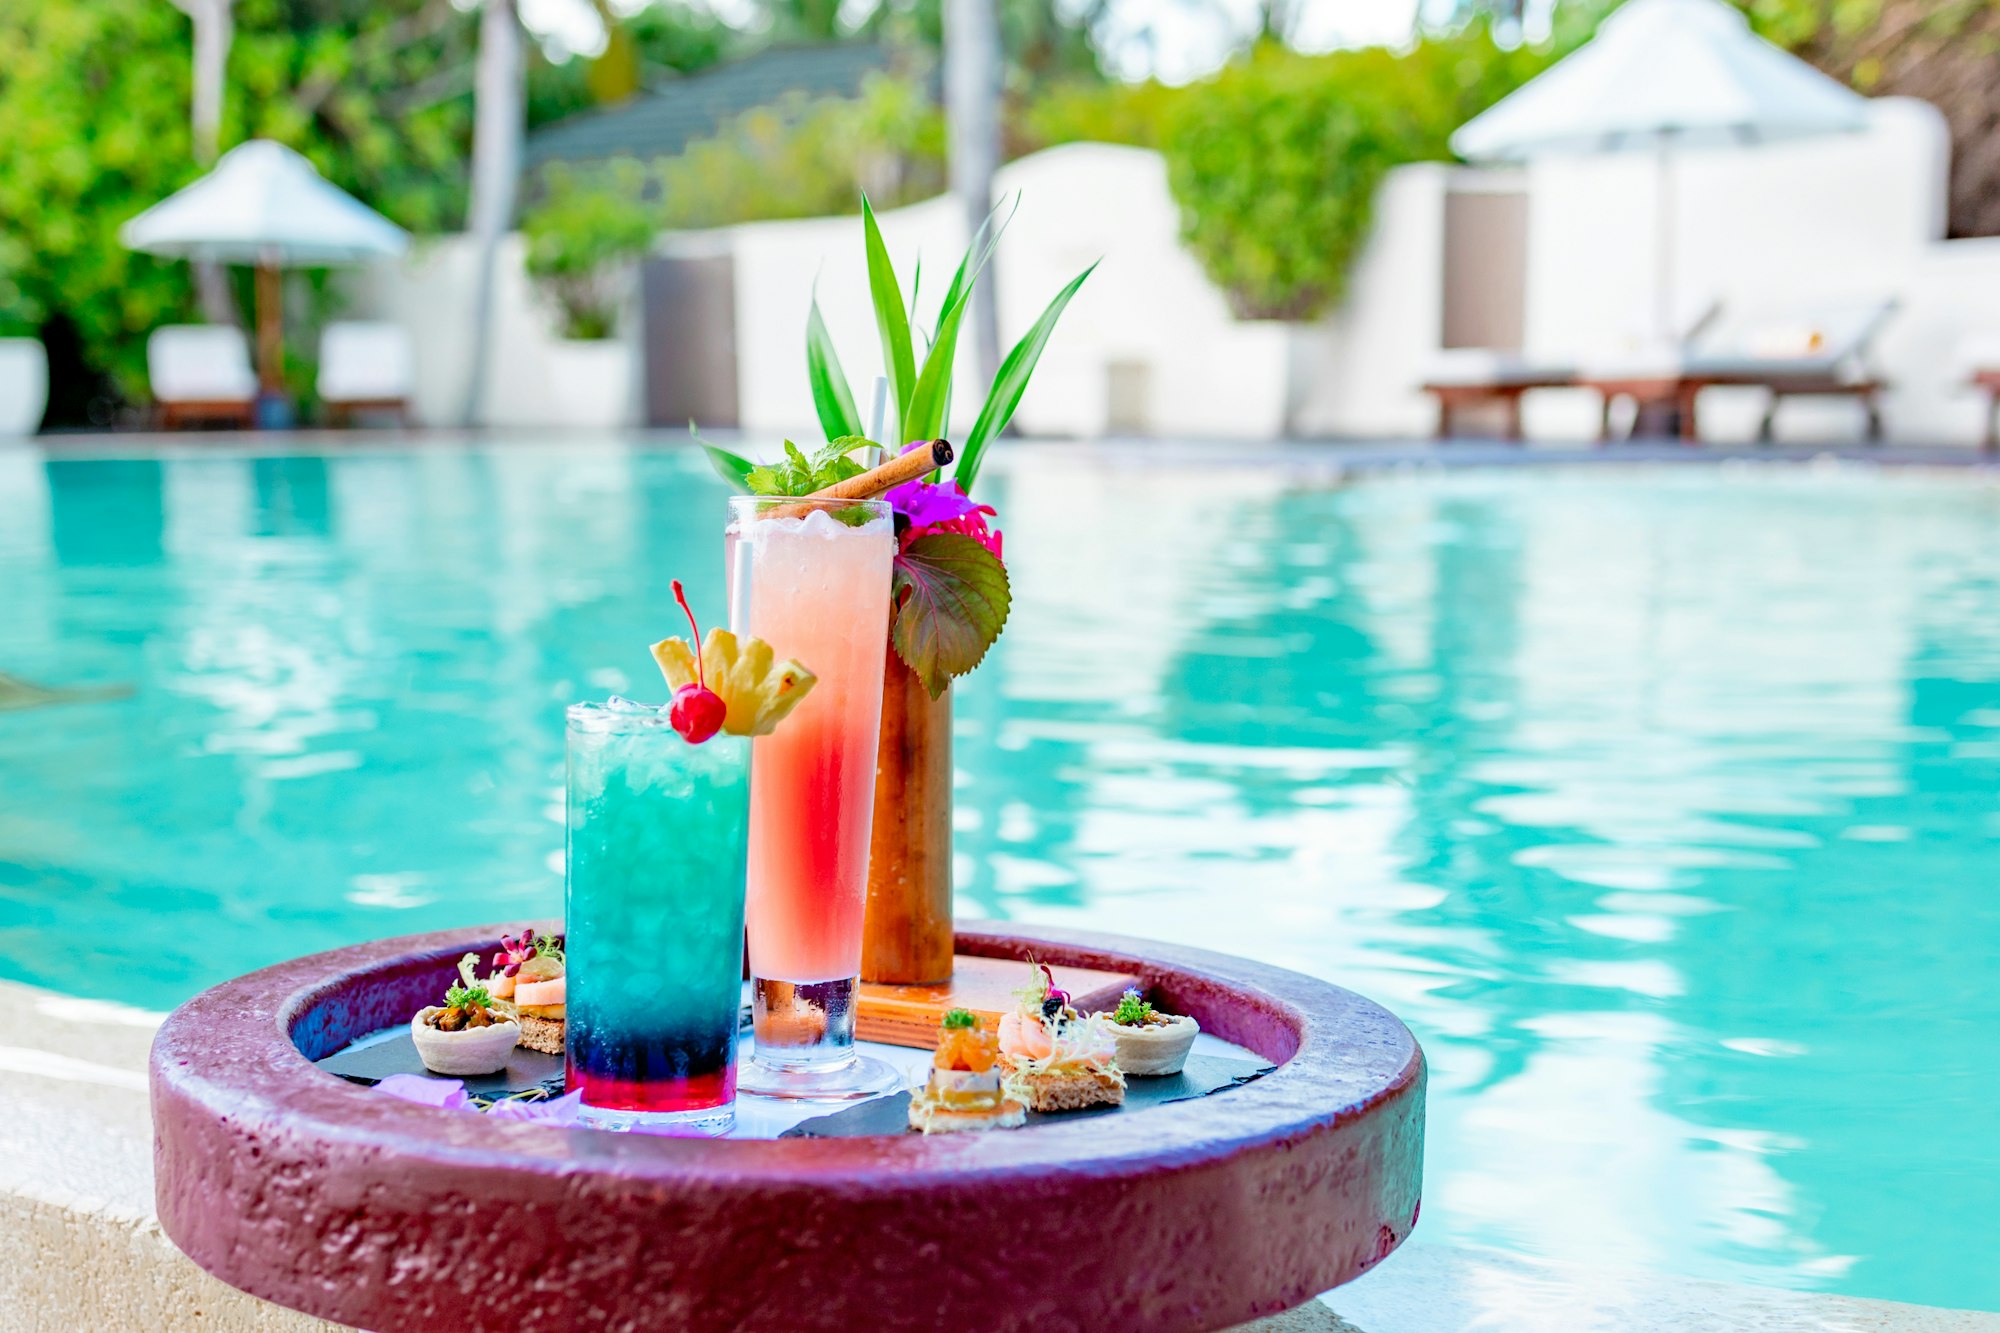 served floating tray in swimming pool with drinks and snacks on tropical island resort in Maldives,